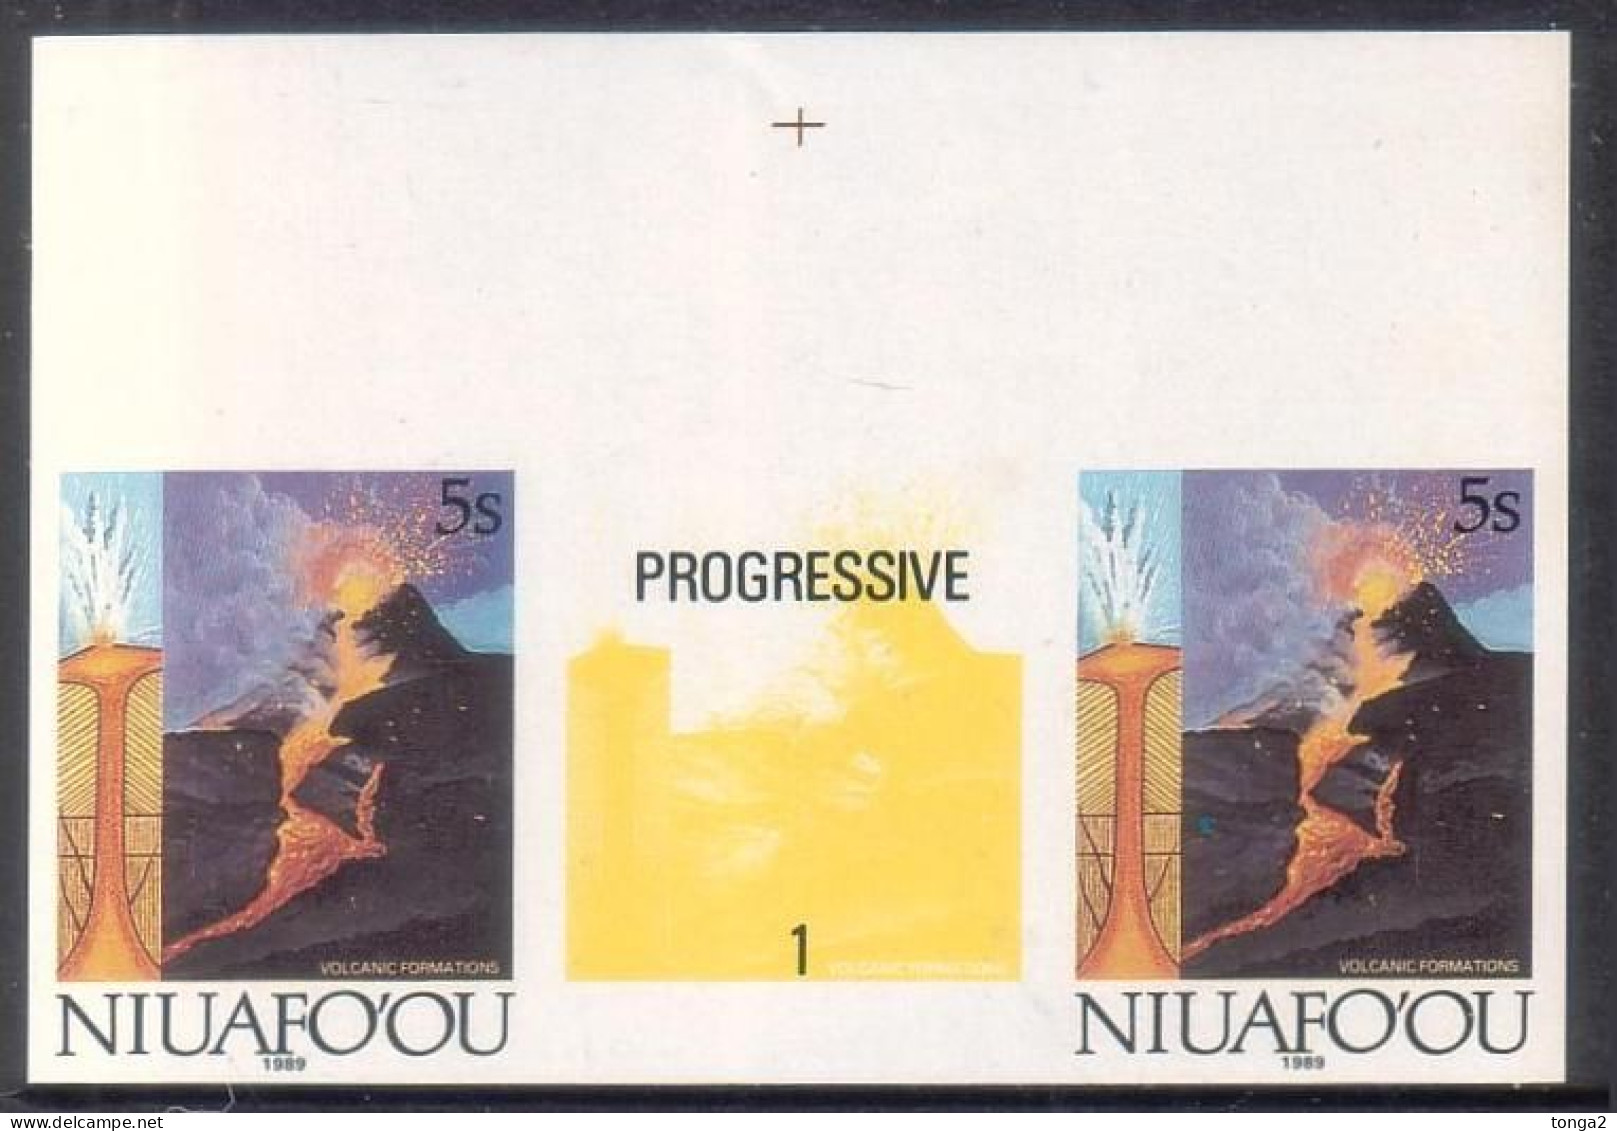 Tonga Niuafo'ou 1989 Mperf Plate Proof Strip -  Volcano - From Evolution Of Earth Set - Volcans